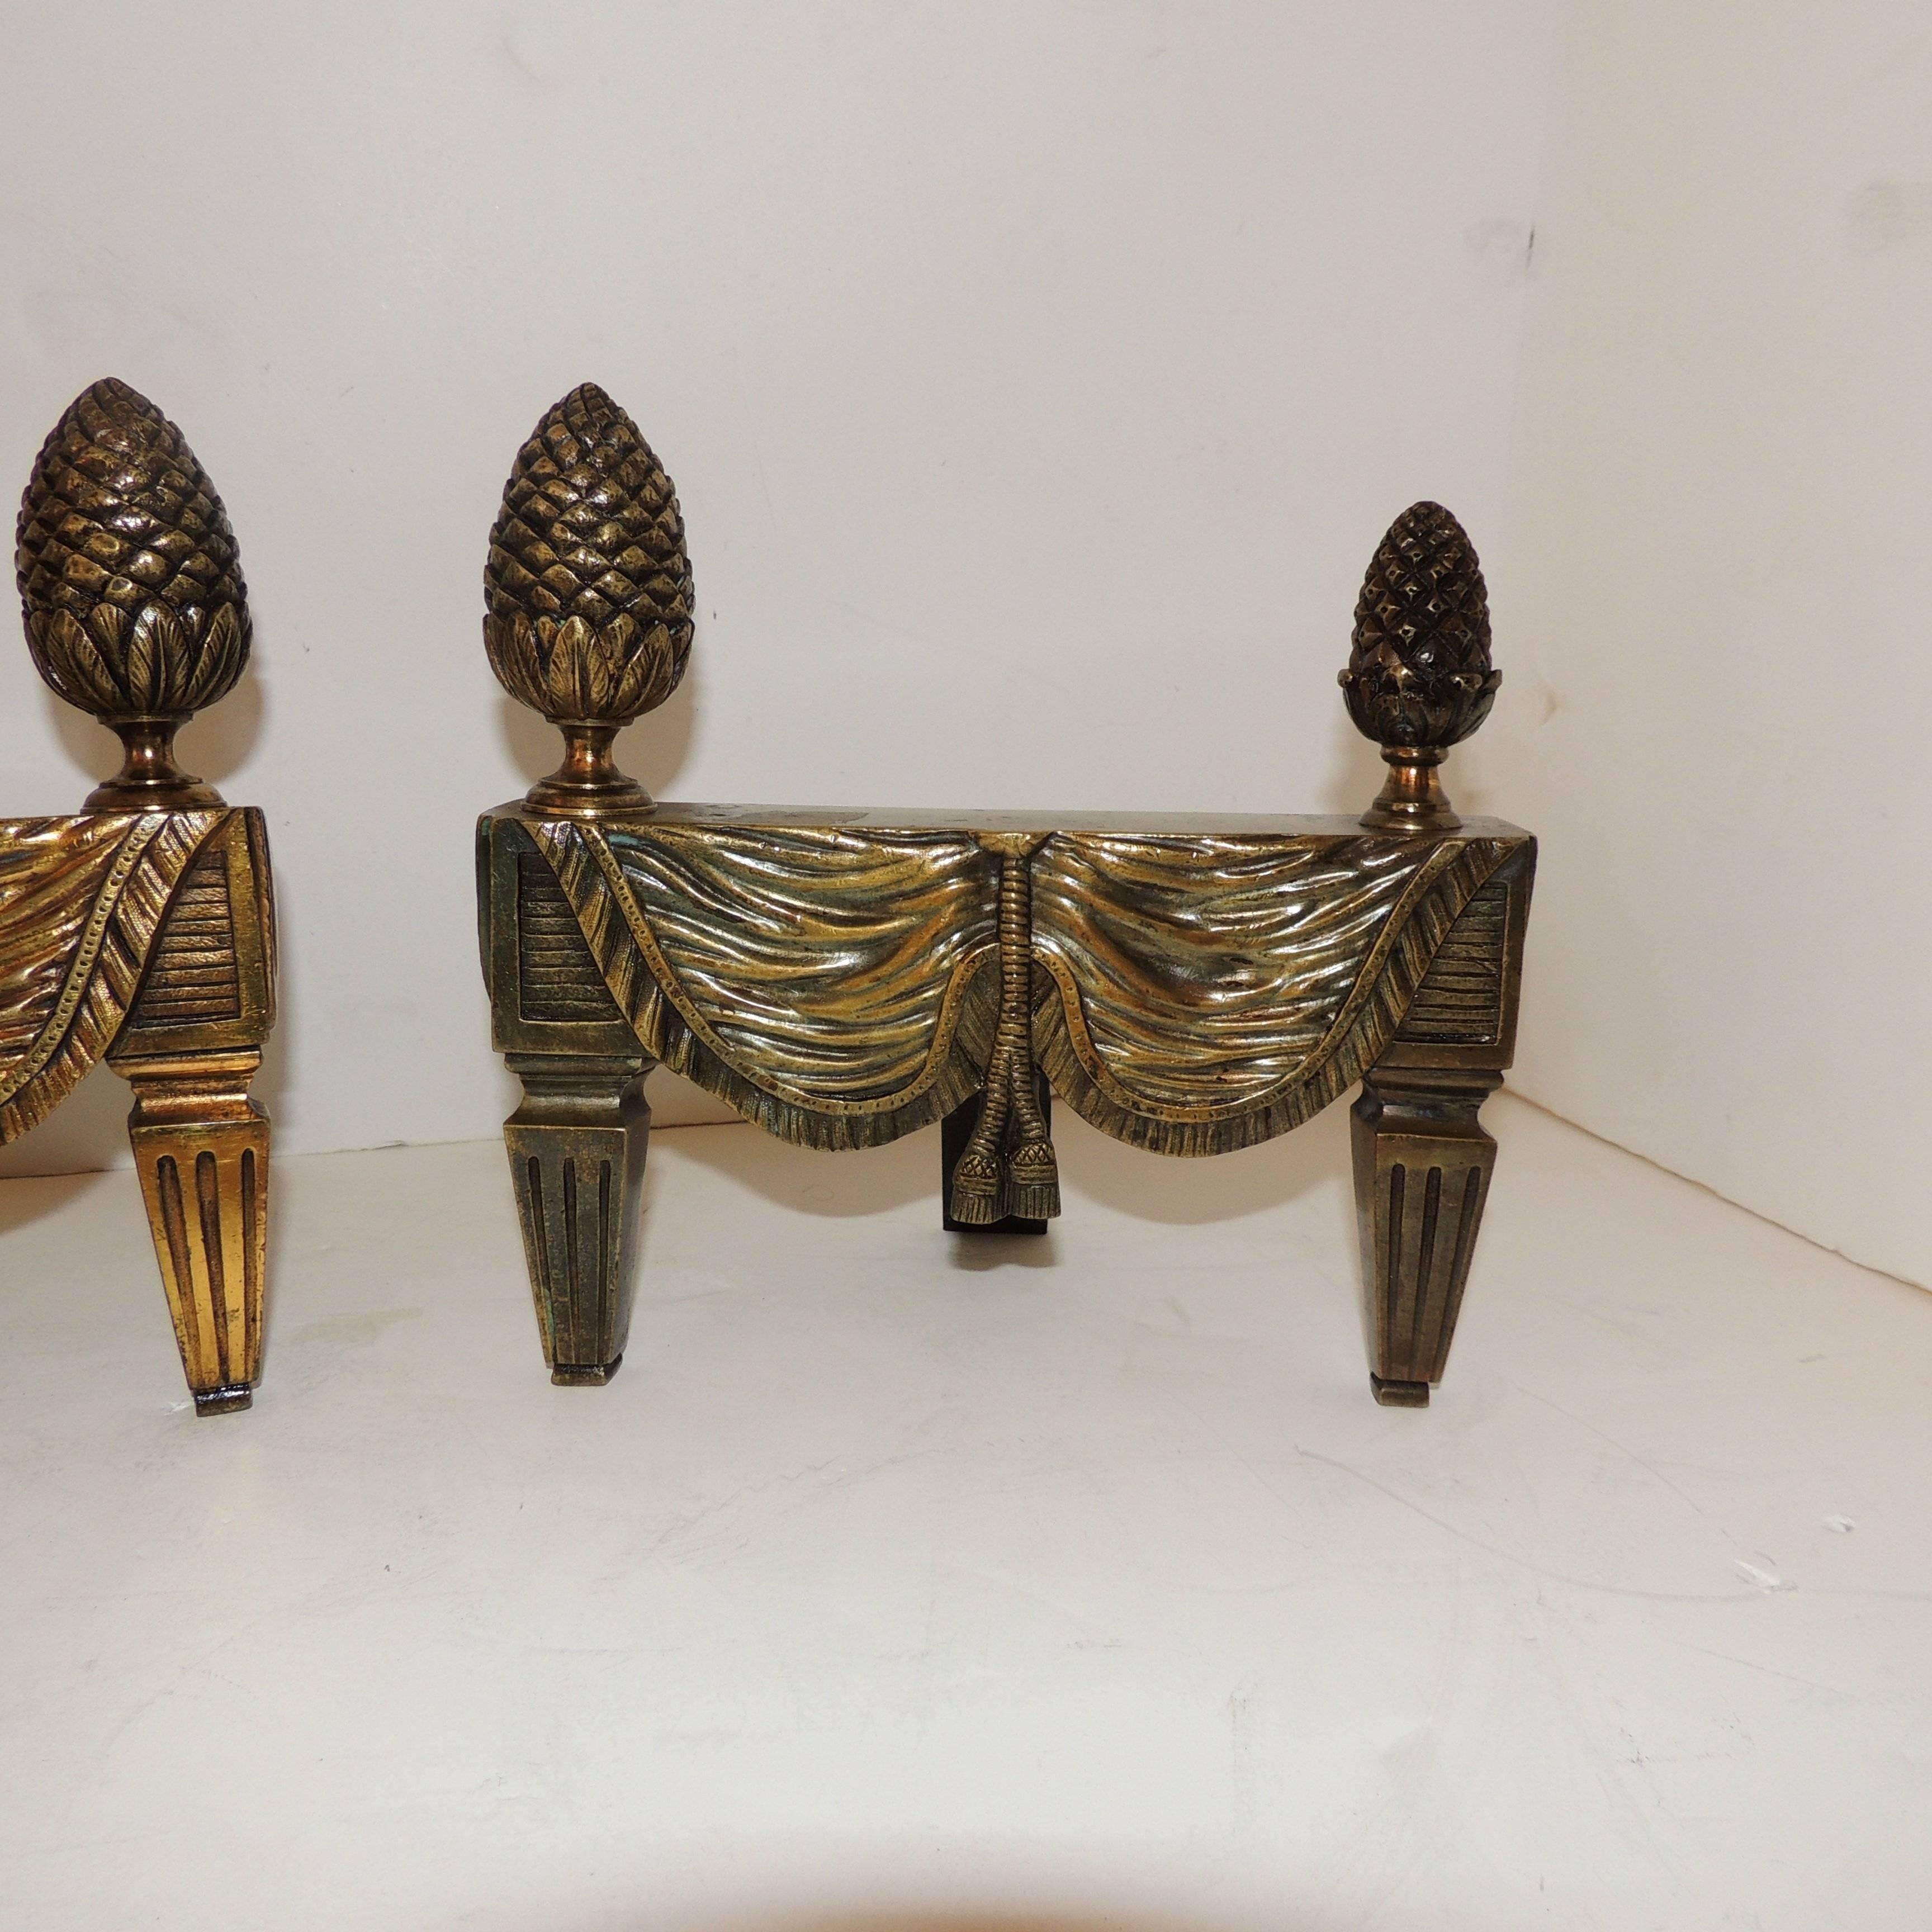 Wonderful French Bronze Neoclassical Fireplace Draped Fabric Chenets Andirons In Good Condition For Sale In Roslyn, NY